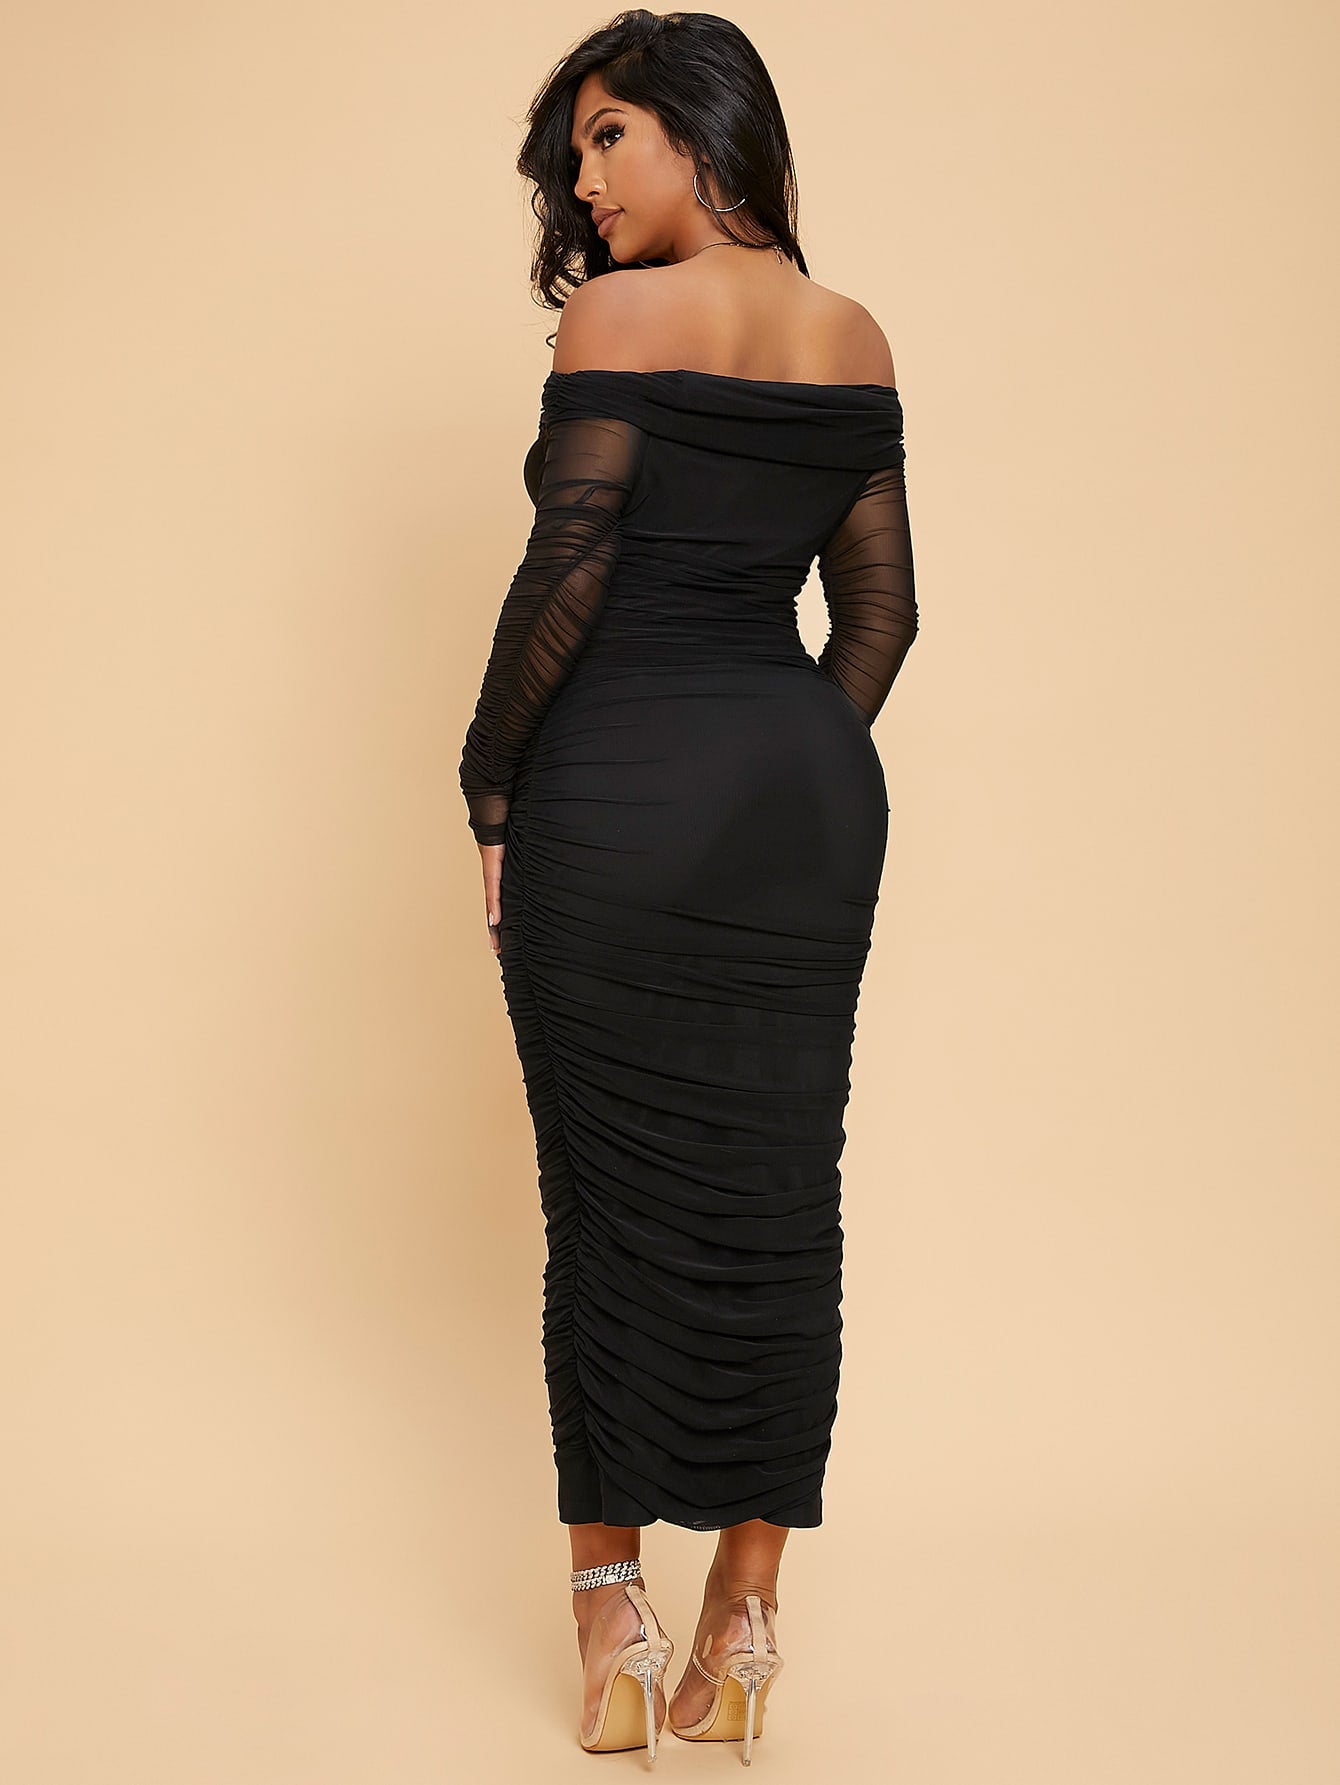 LLstyle-Off Shoulder Ruched Mesh Bodycon Dress